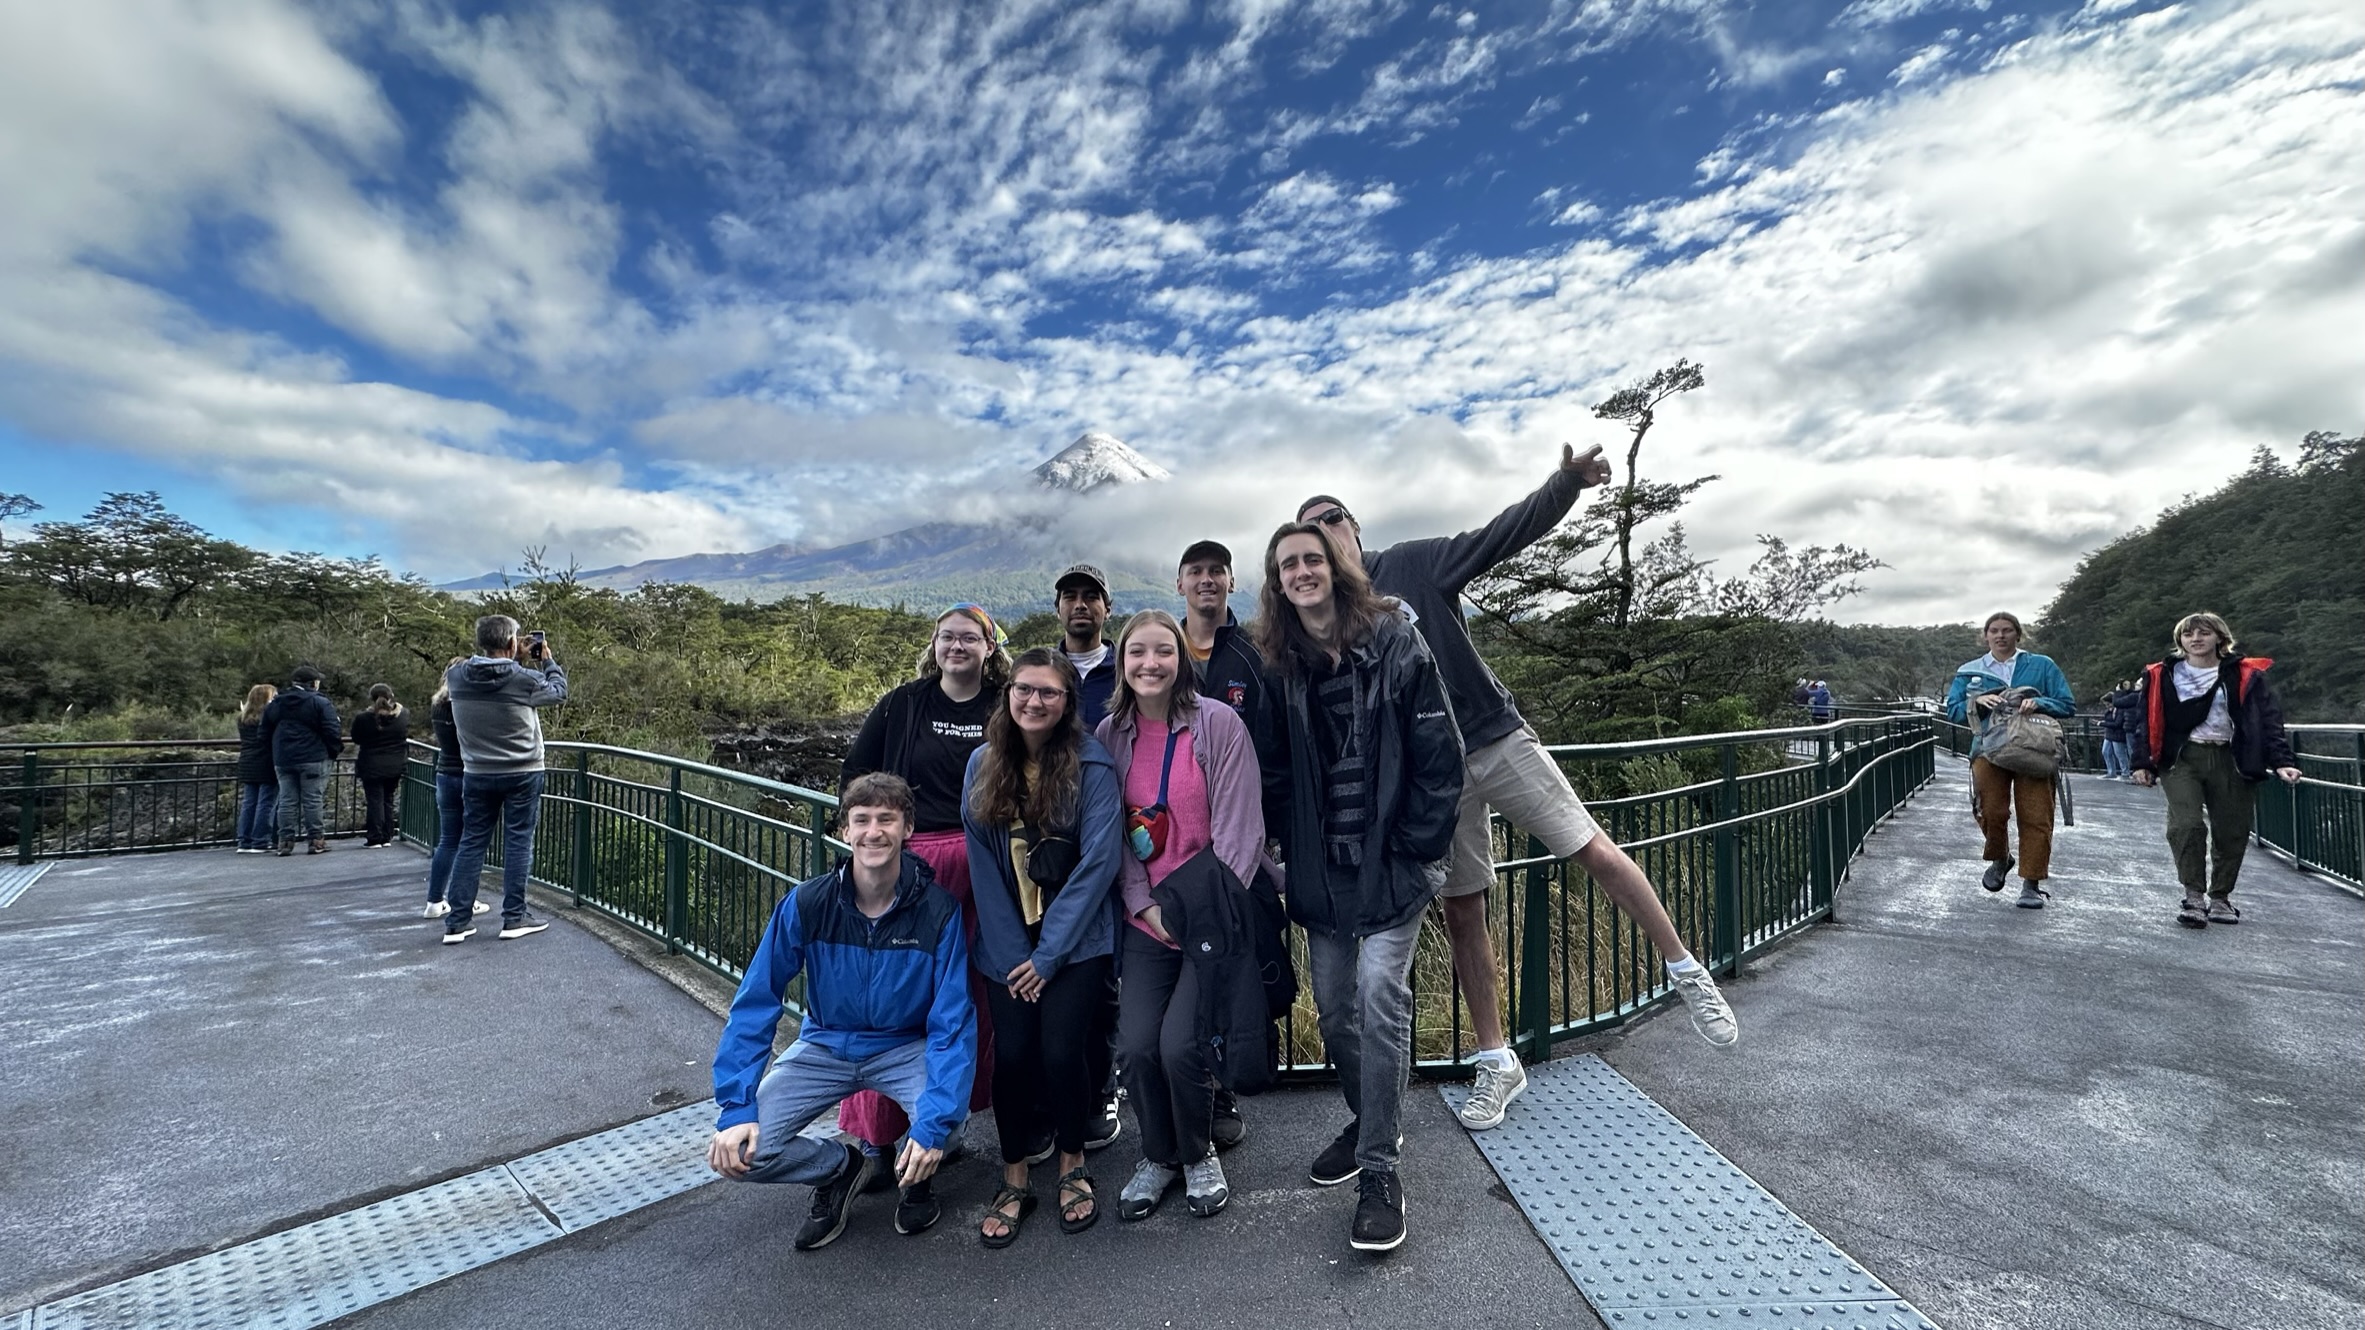 Students exploring near the Andes mountains in Puerto Montt, Chile.